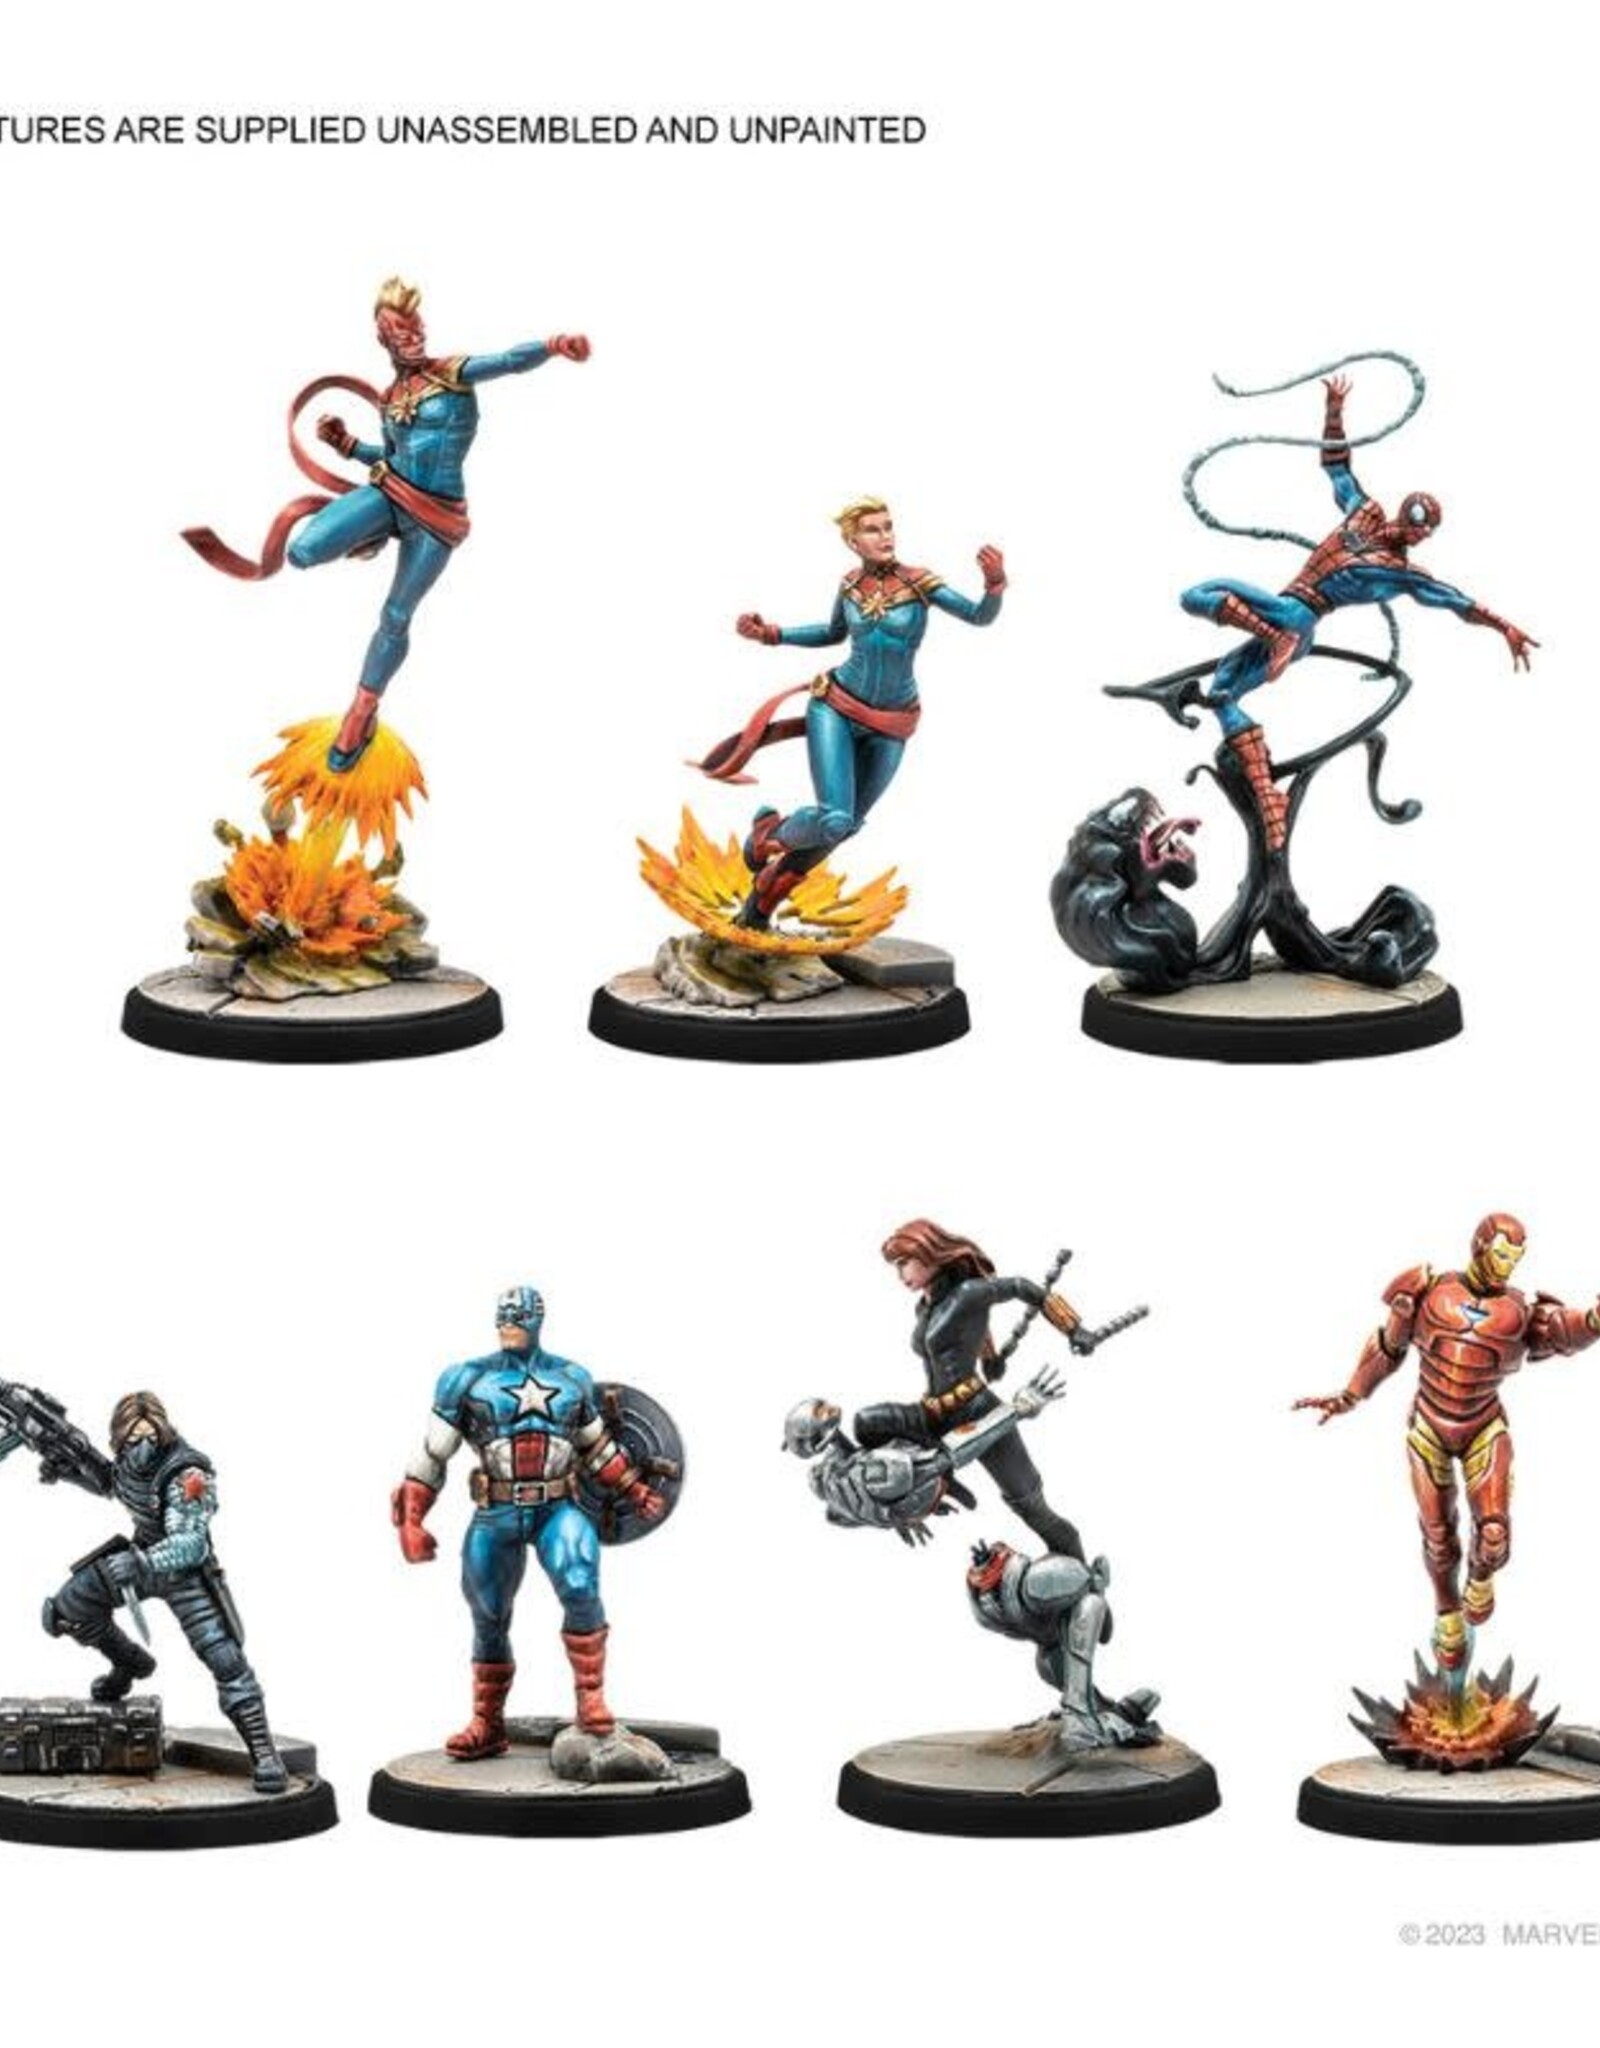 Atomic Mass Games Marvel Crisis Protocol: Earth's Mightiest Core Set